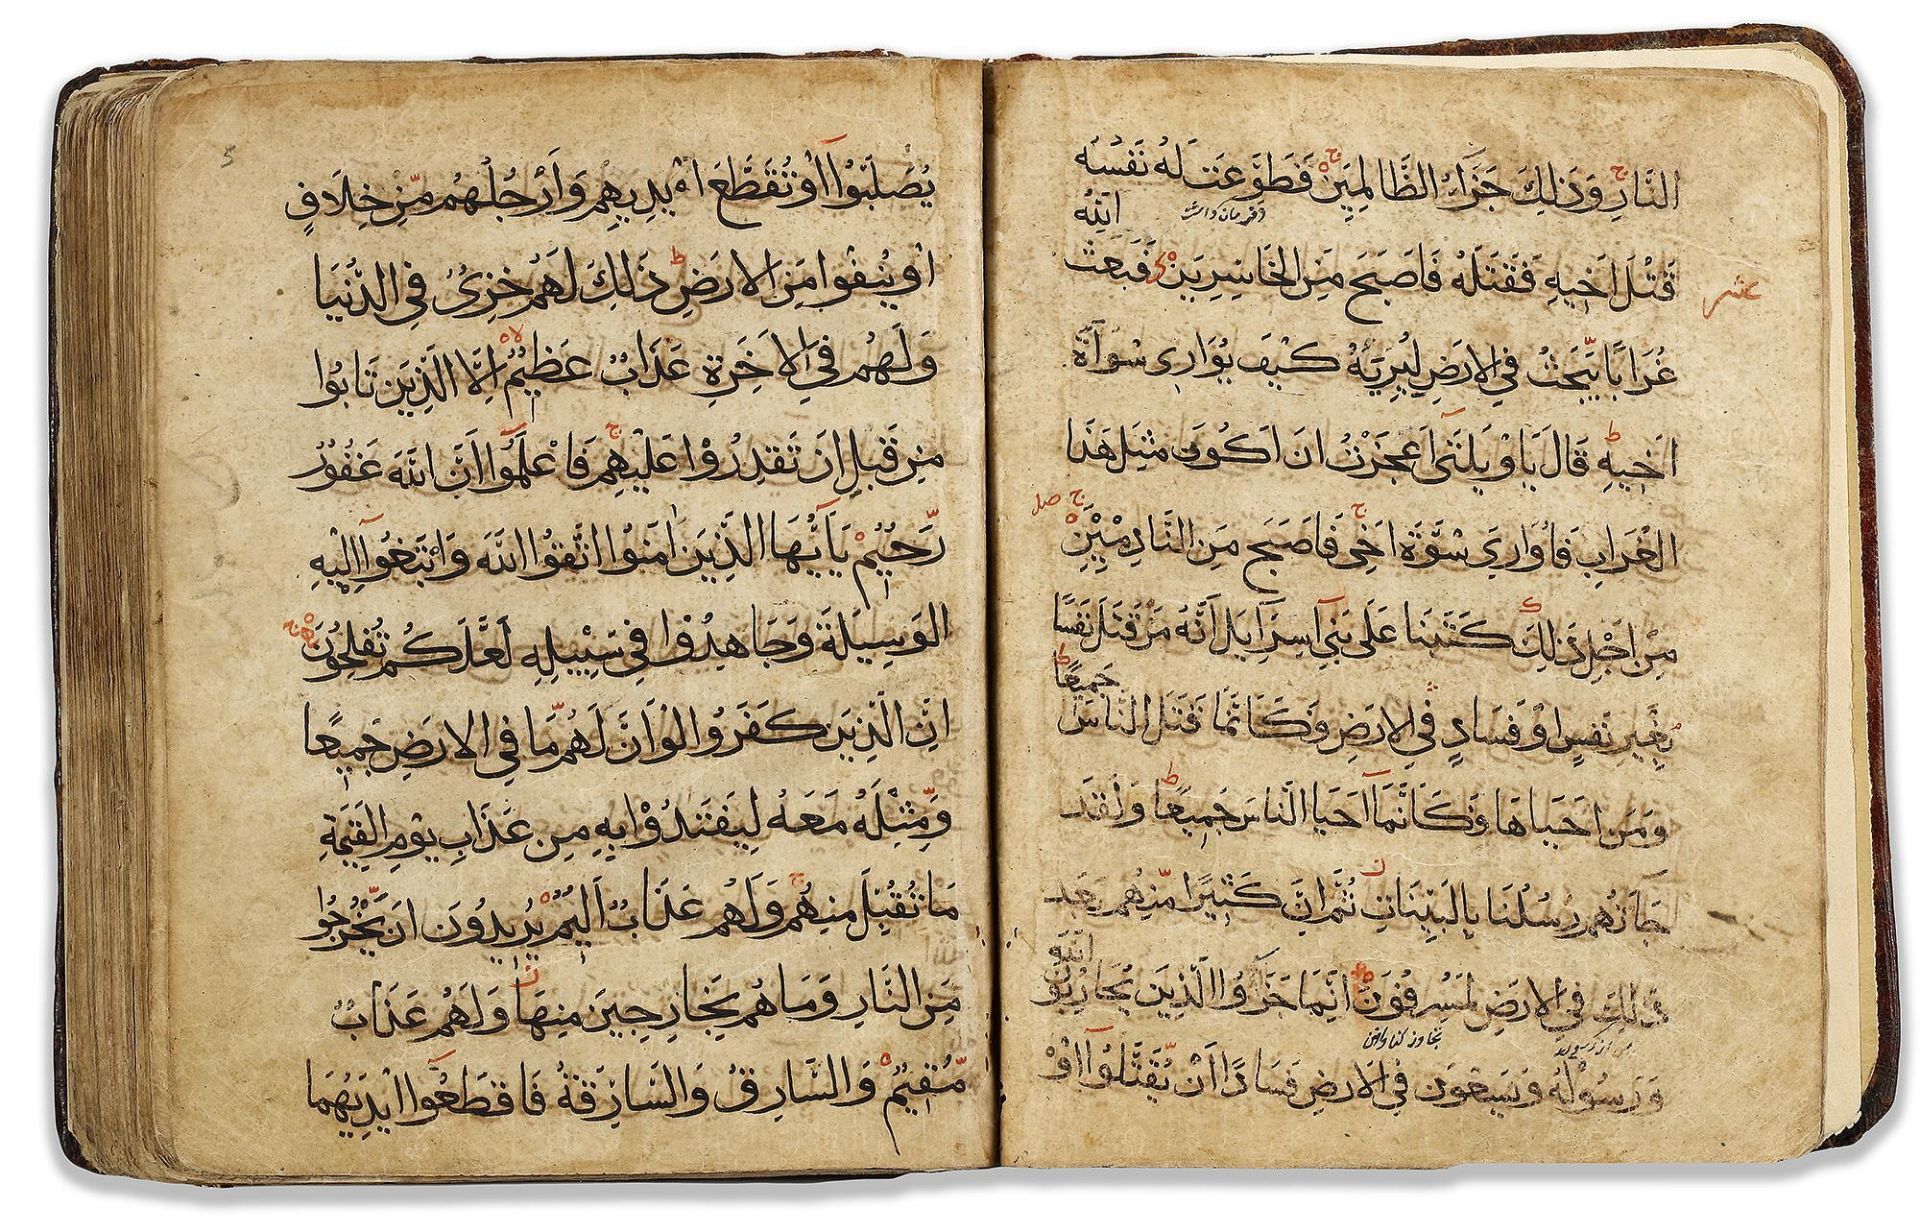 A QURAN JUZ, CENTRAL ASIA, 16TH-17TH CENTURY - Image 3 of 6